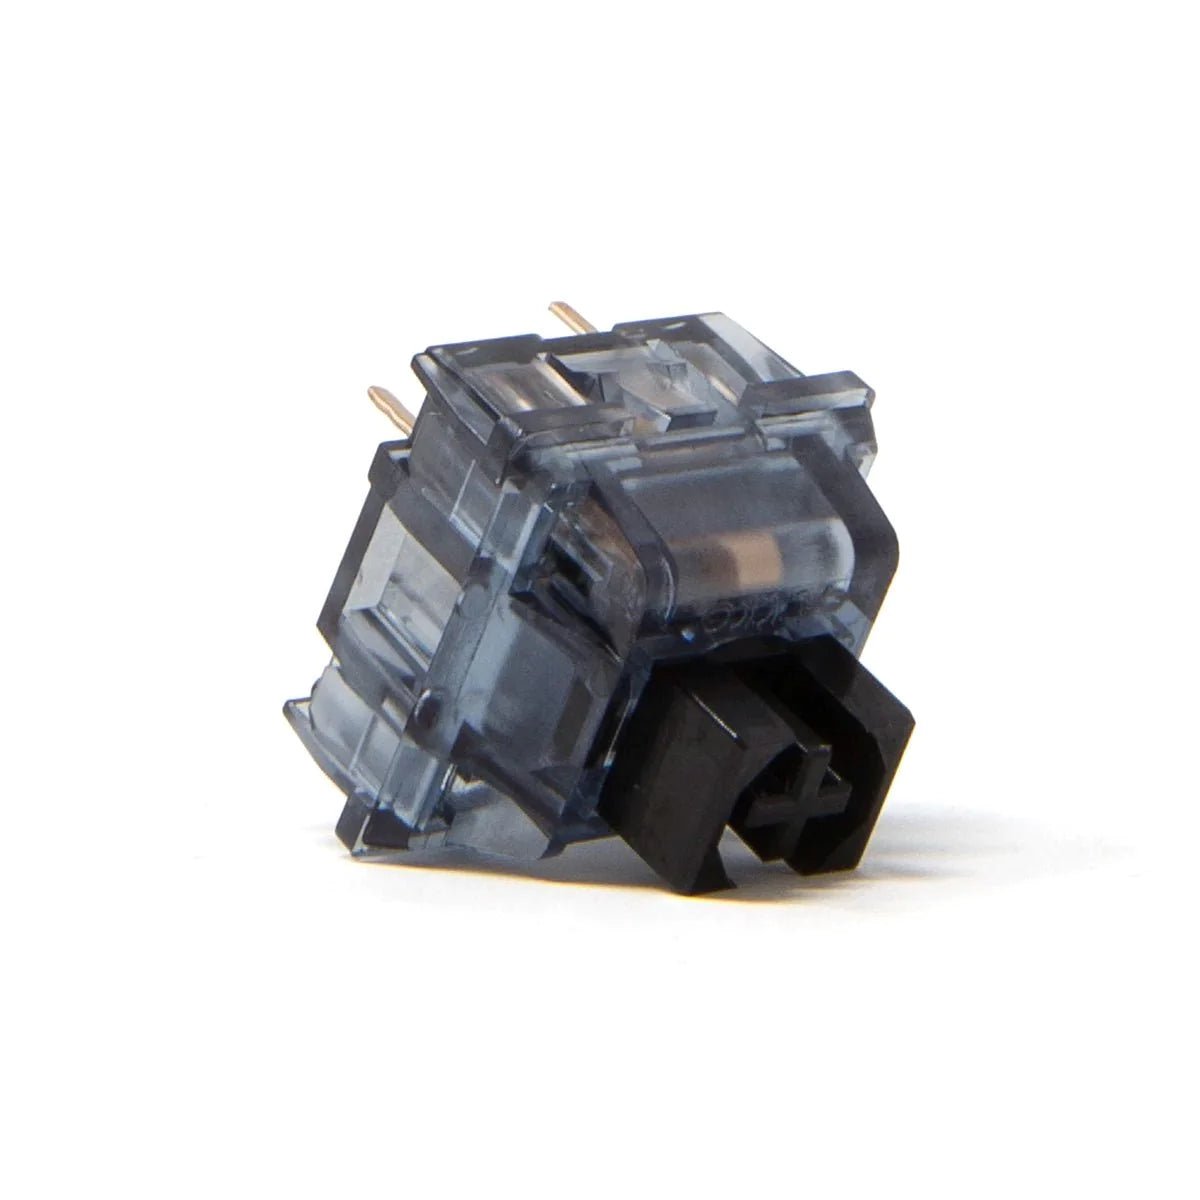 Switch-Akko CS Jelly Black Linear Switches (Factory Pre-Lubed) - Meow Key